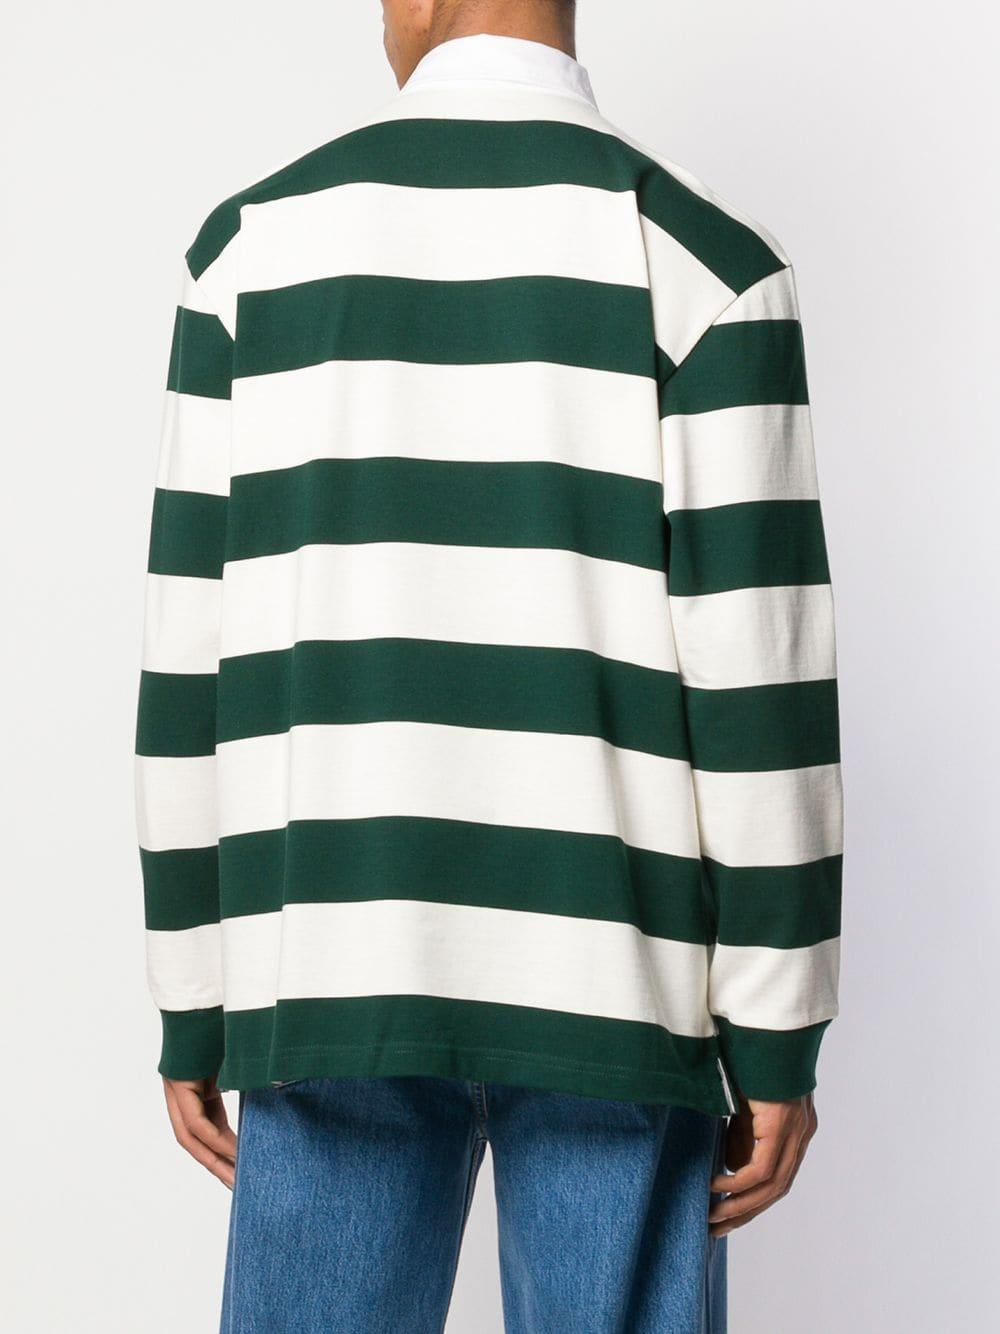 Carhartt WIP Cotton Striped Polo Shirt in Green/White (Green) for Men | Lyst